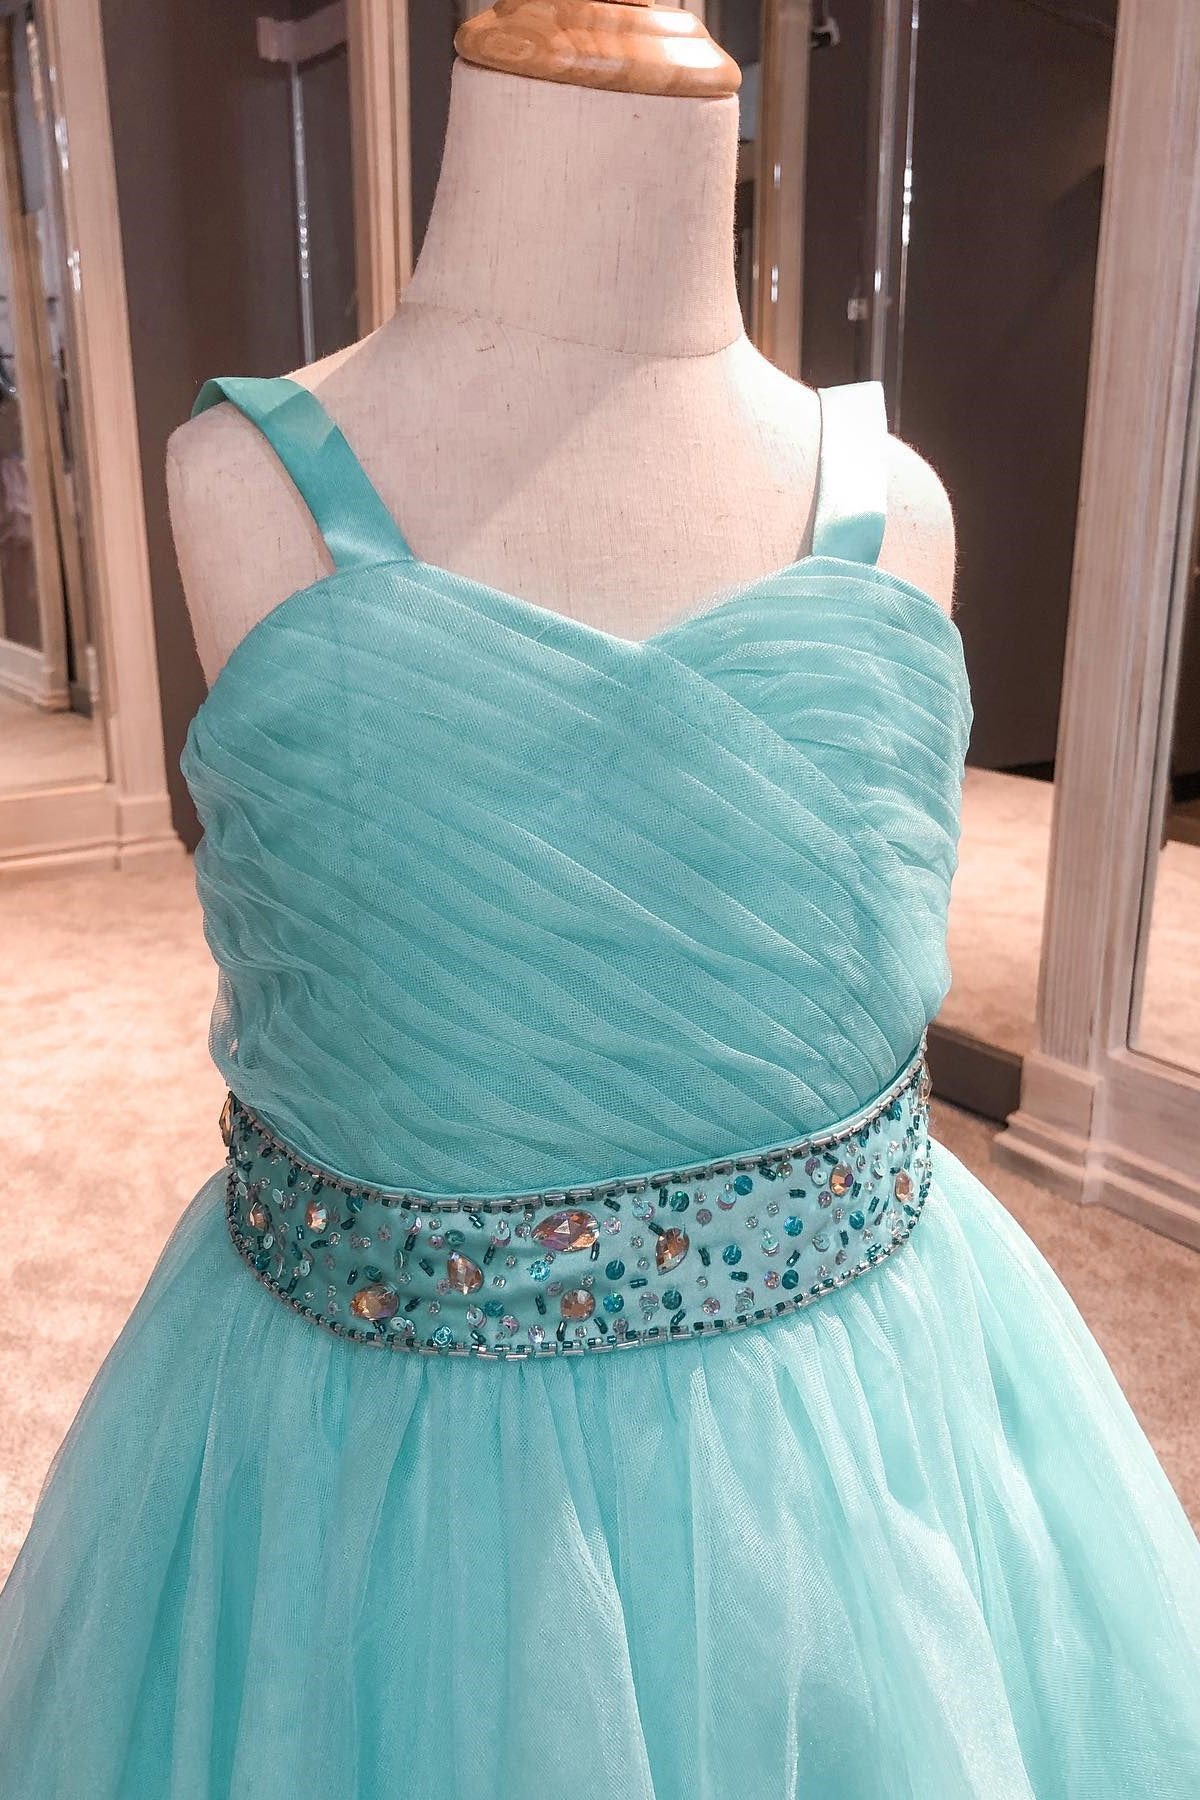 Aqua Blue Tulle A-Line Girl Pageant Dress with Rhinestones